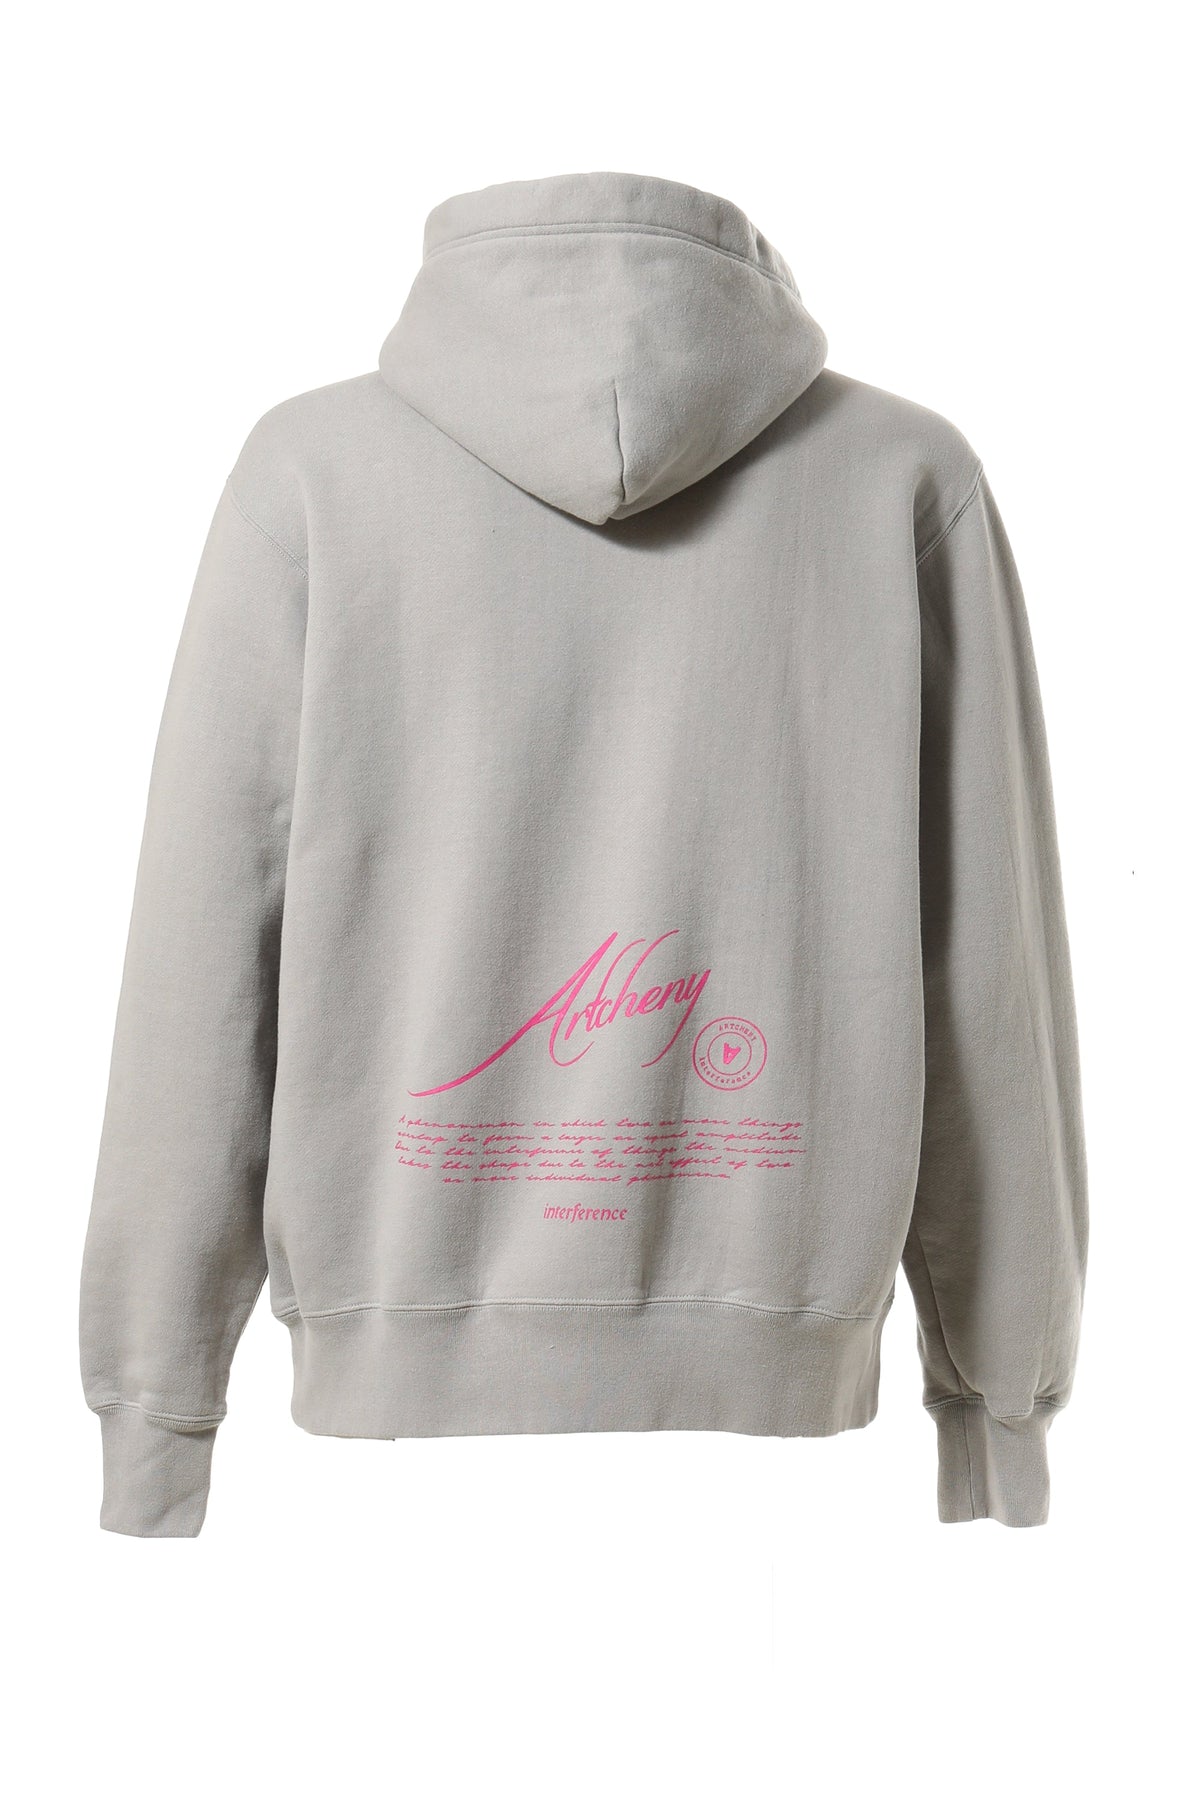 GATE BY SORA AOTA PULLOVER HOODIE / GRY